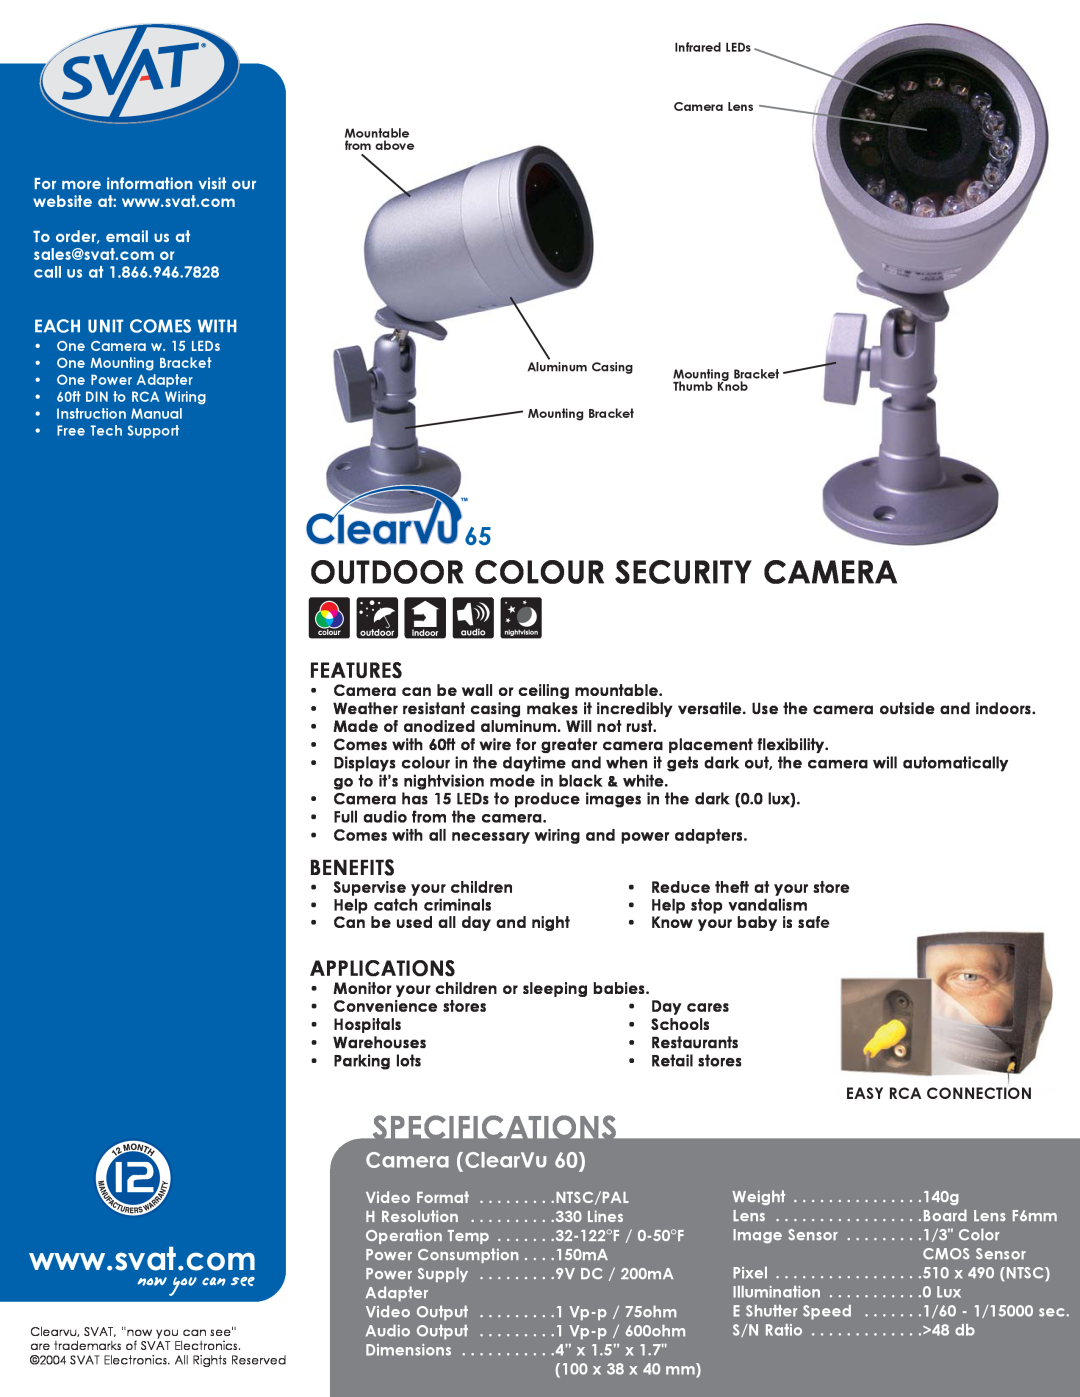 SVAT Electronics Clearvu65 manual Outdoor Colour Security Camera, Specifications, Features, Benefits, Applications 